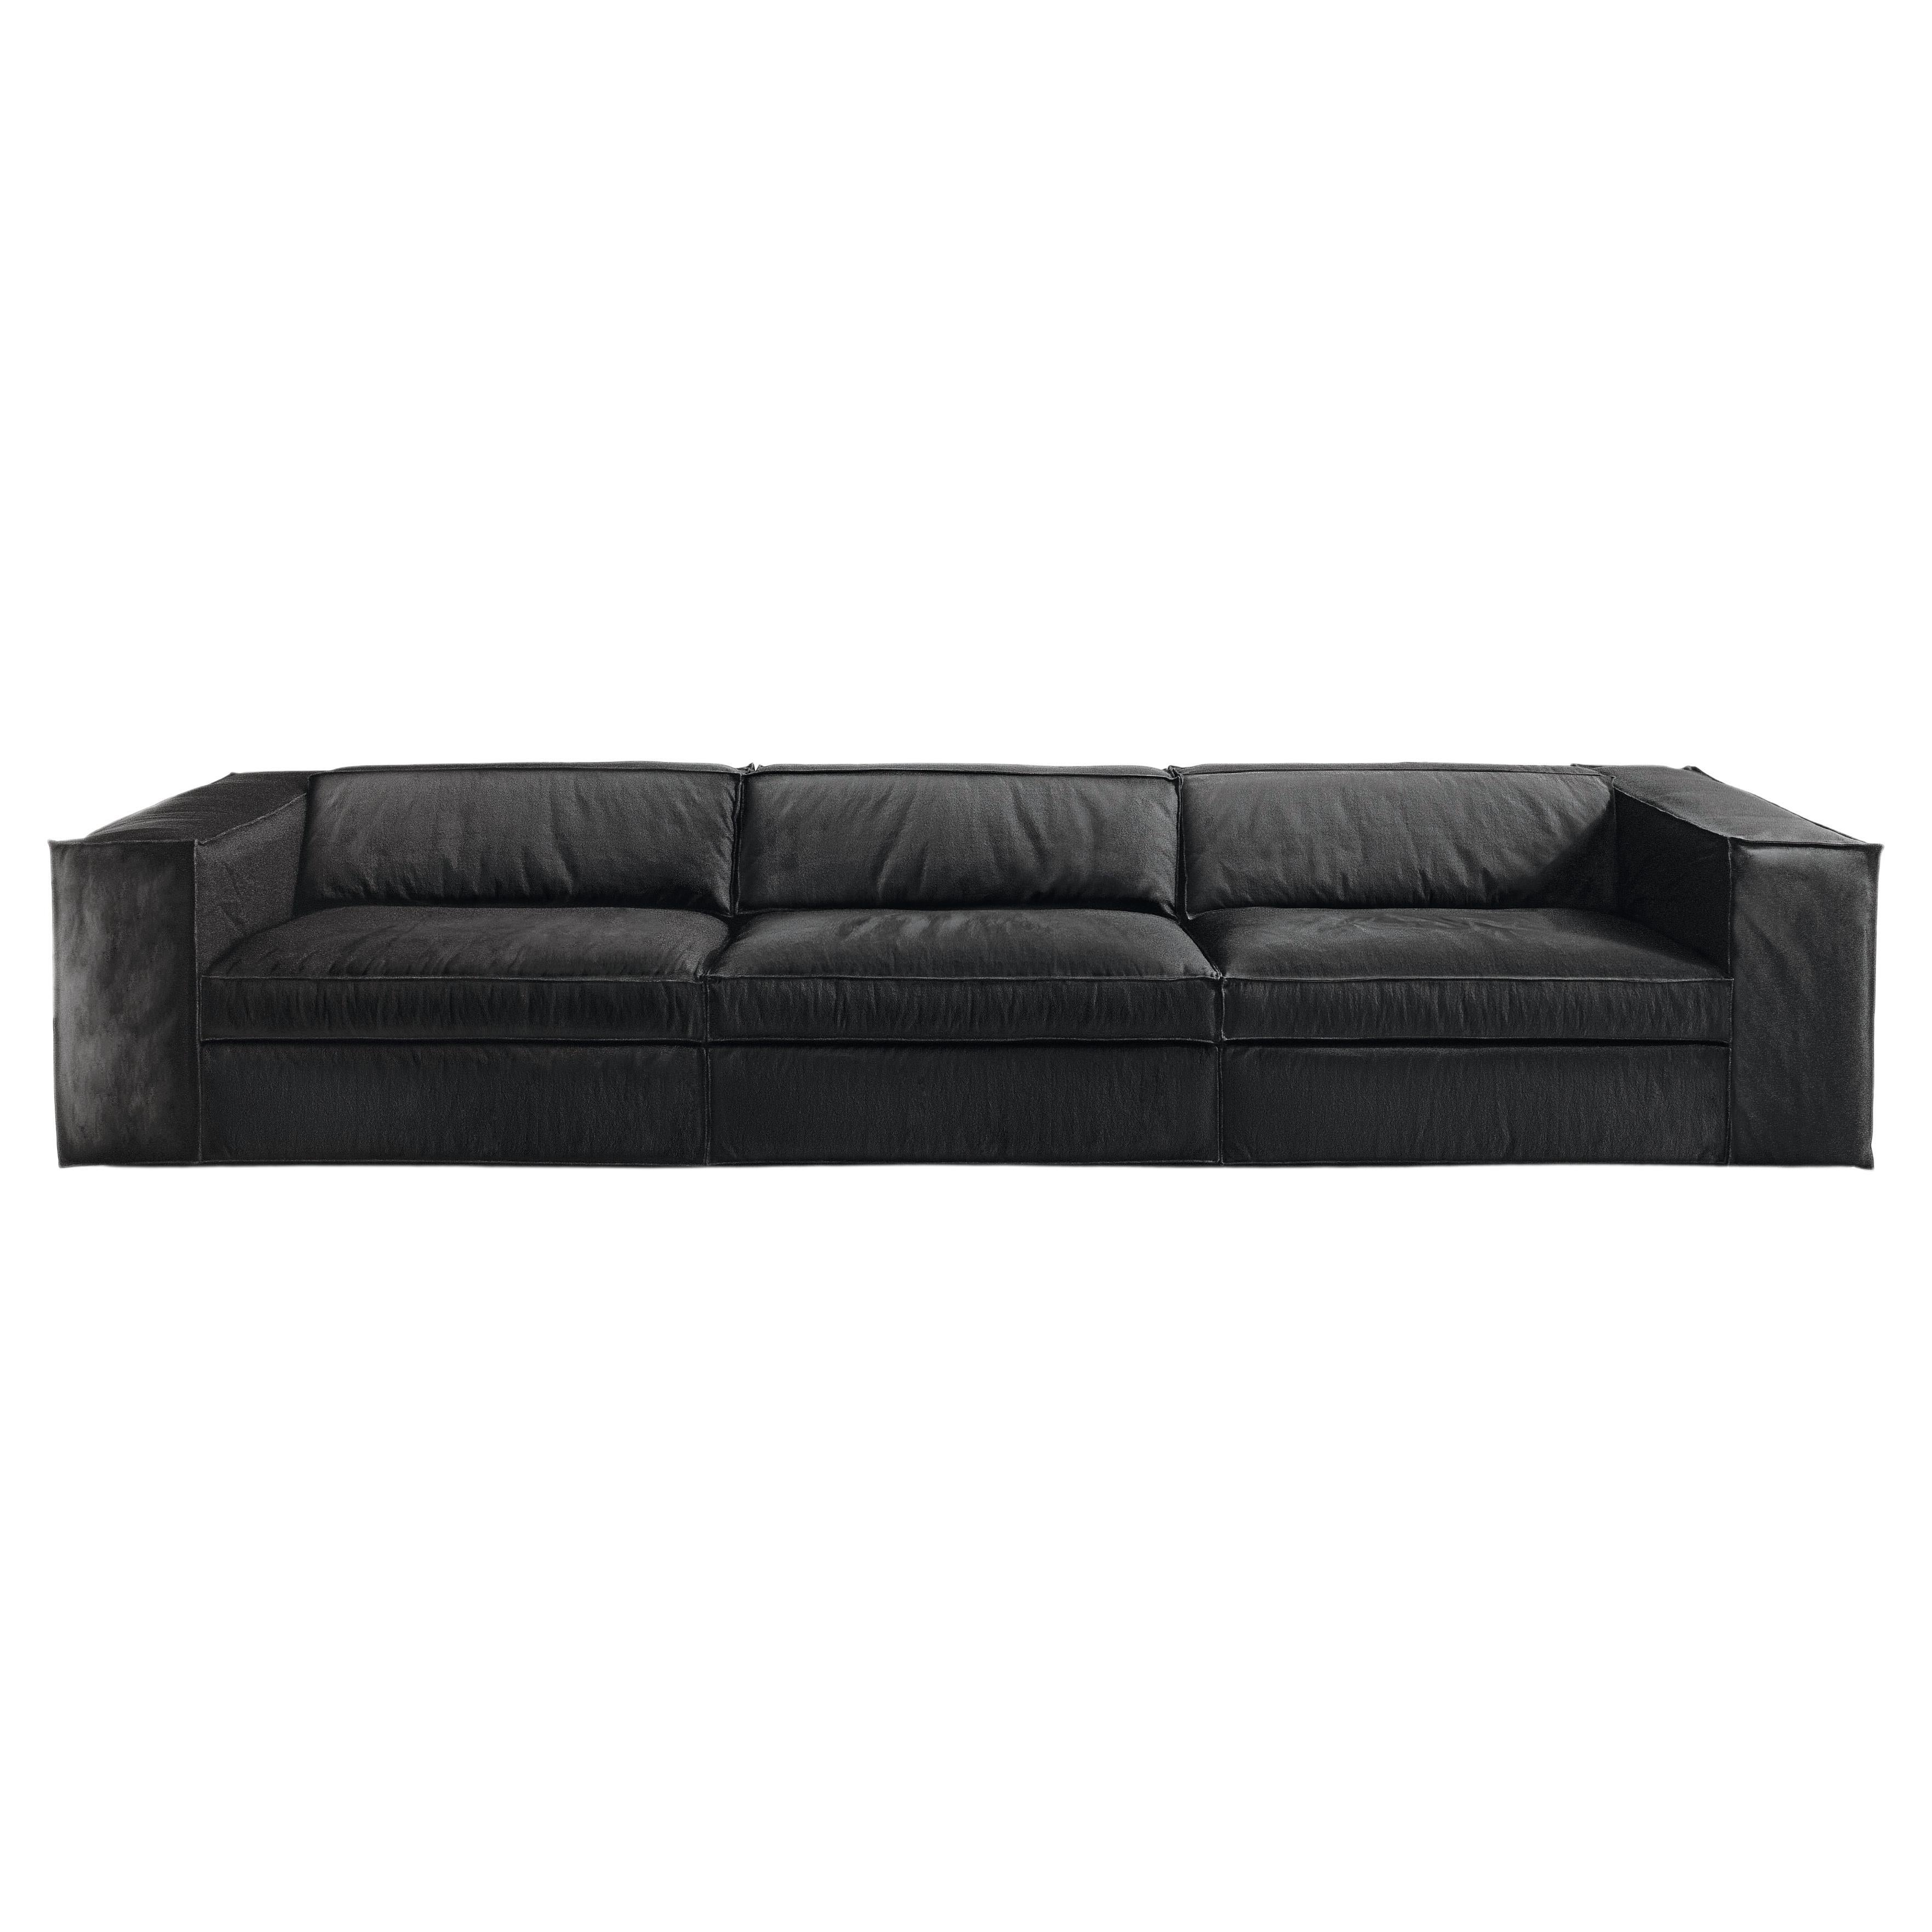 Up Small 3-Seat Sofa in Braided Black Upholstery by Giuseppe Viganò